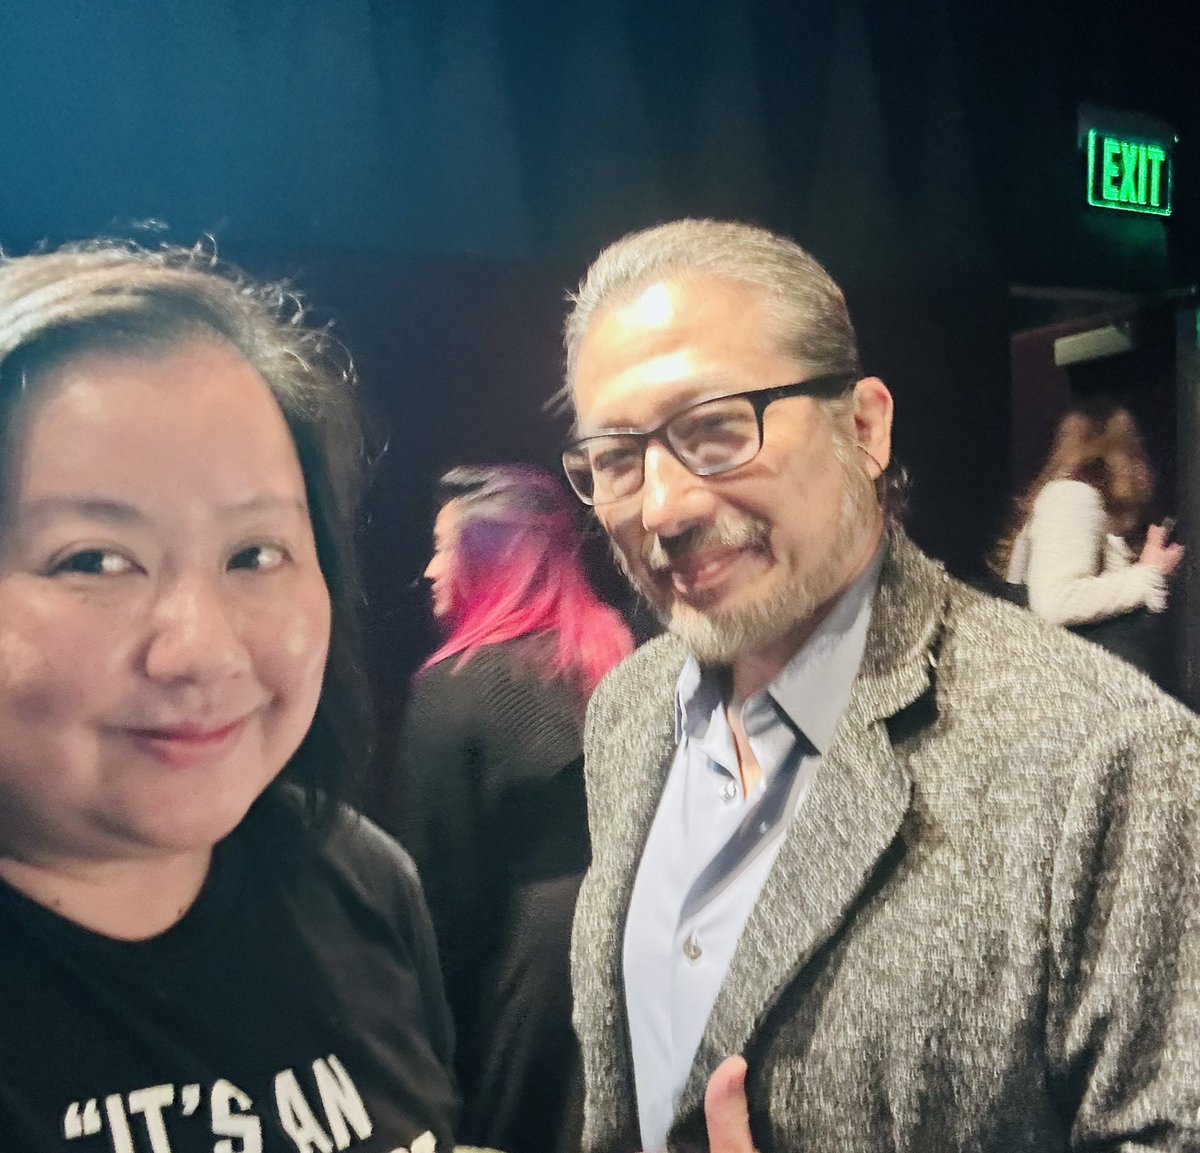 Here I am with the Japanese legend (who is in almost every action Hollywood film) HIROYUKI SANADA San.. This was for the screening of the first 2 episodes of Hulu, FX upcoming series 'SHOGUN', where Sanada San is a producer and main actor for the series! #shogun #hulu #japanese